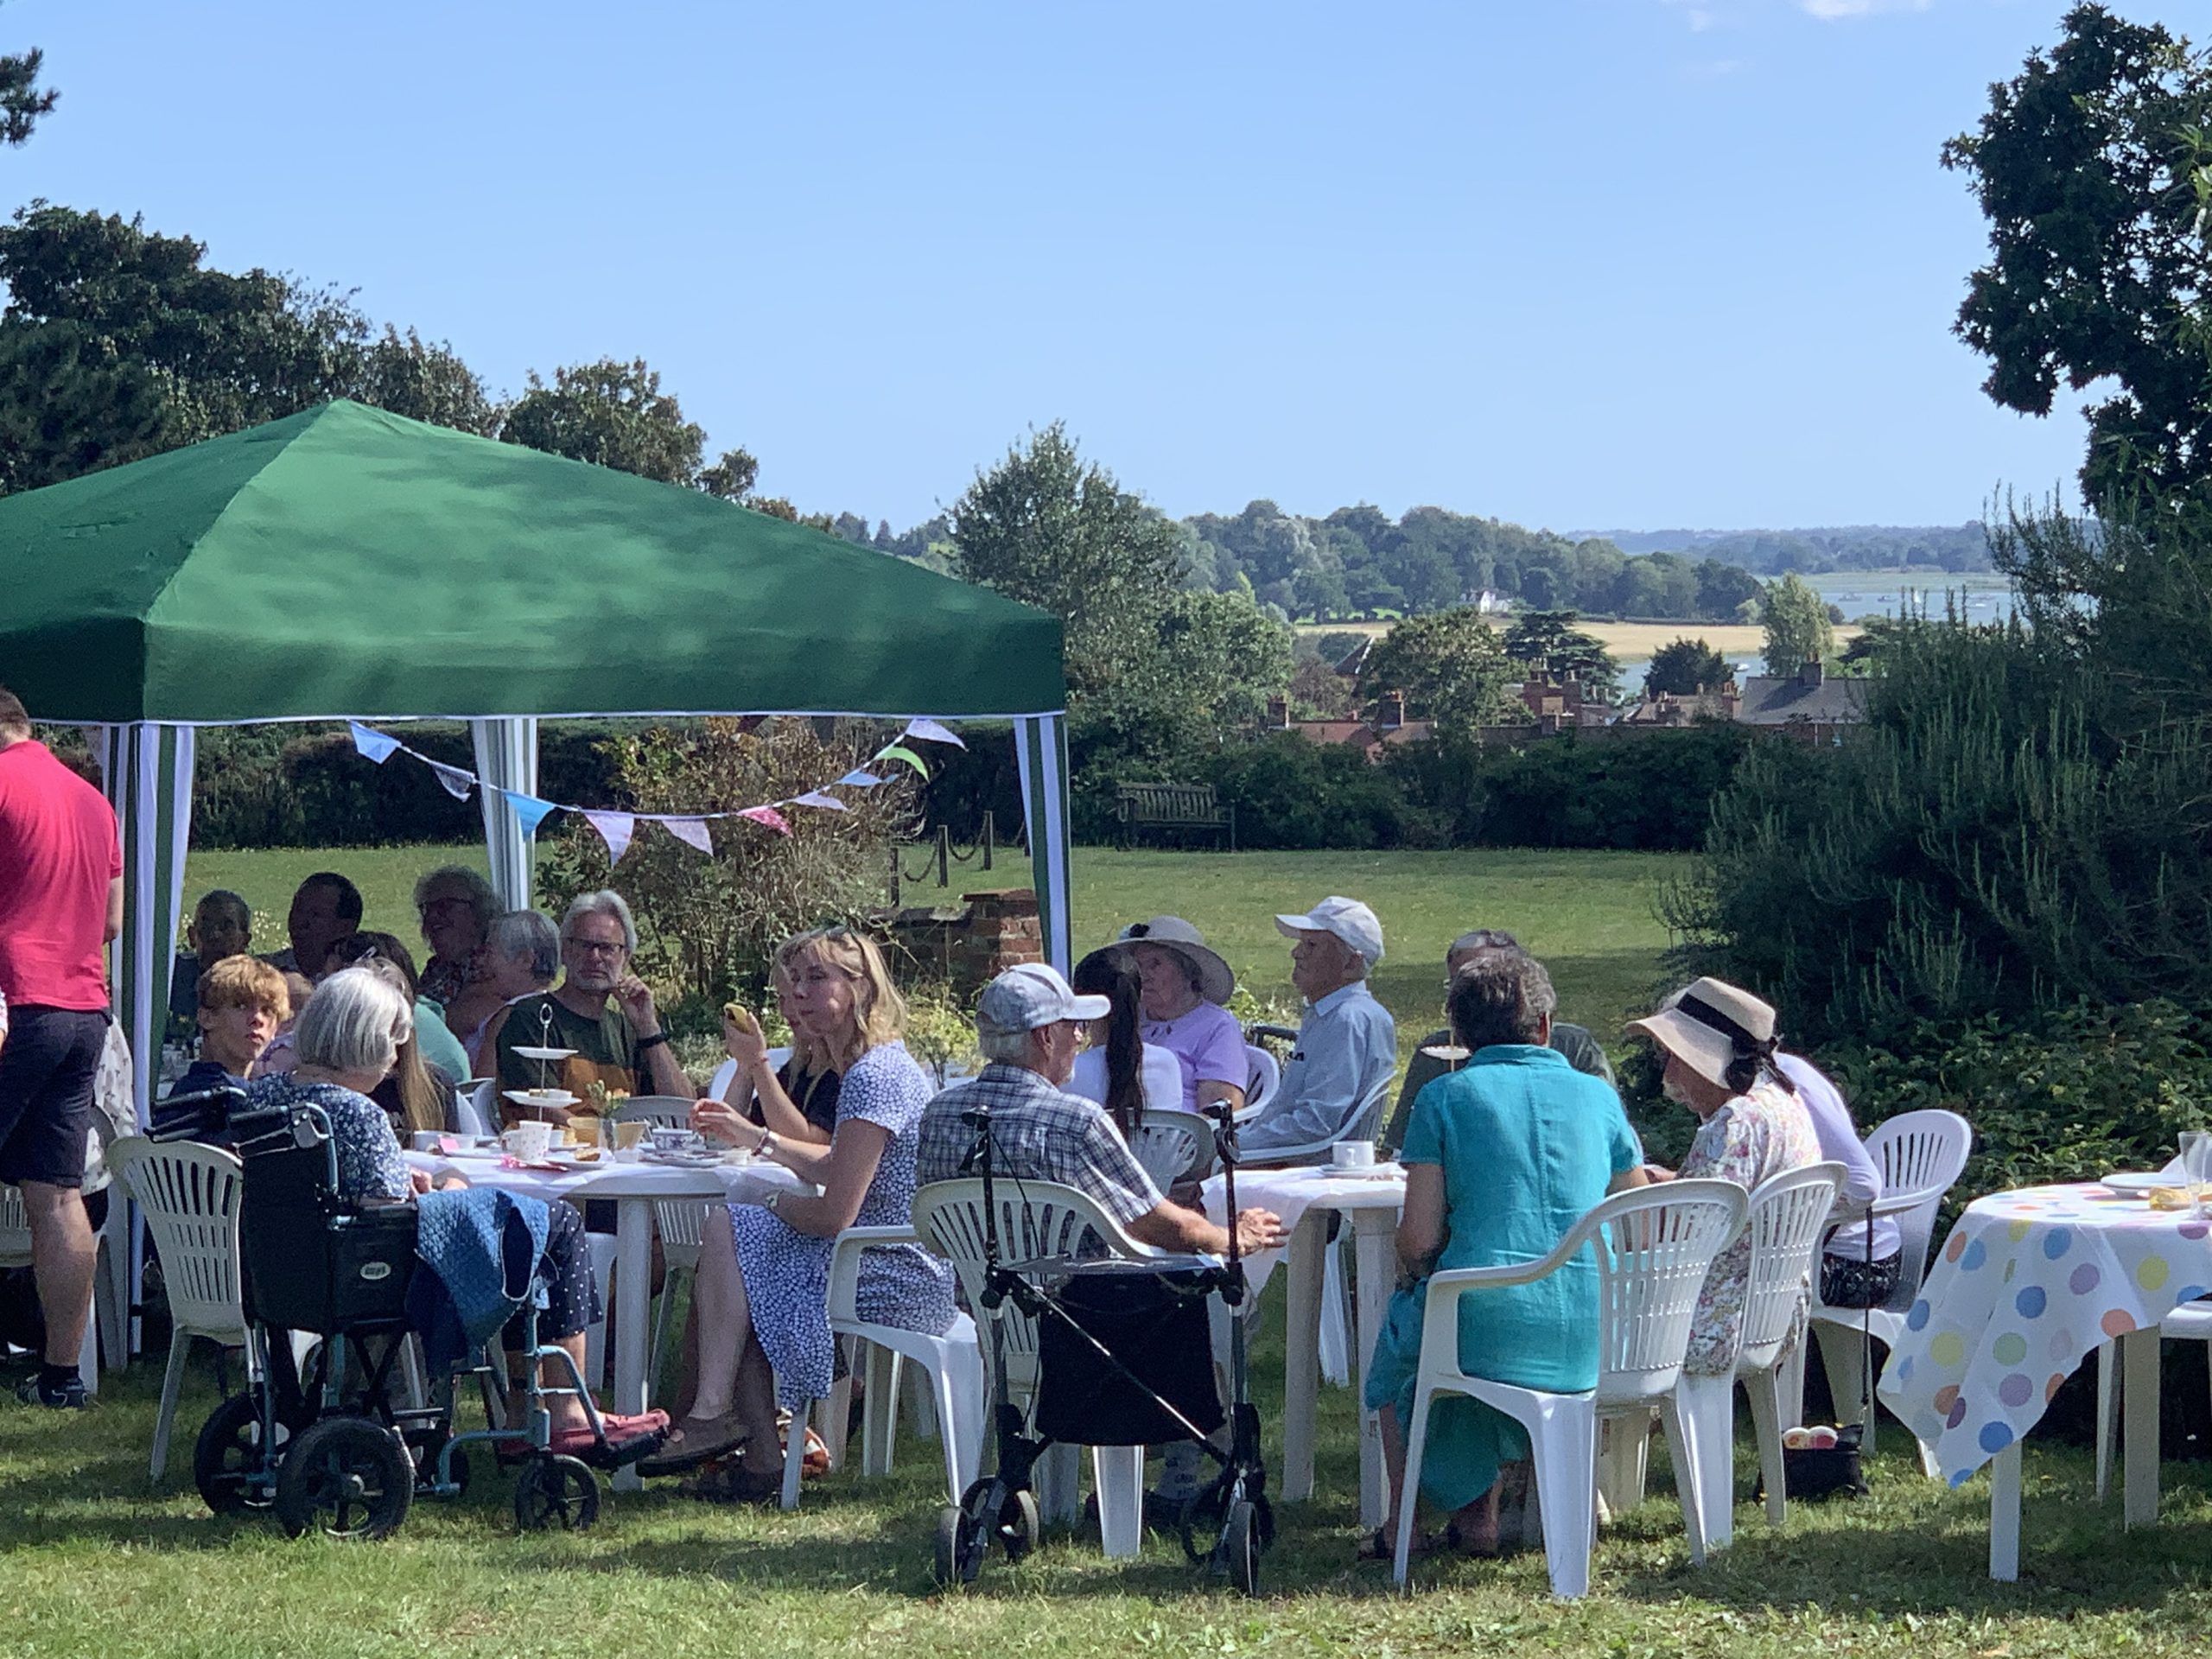 Everyone enjoying the view and the cream tea at Highlands Summer party